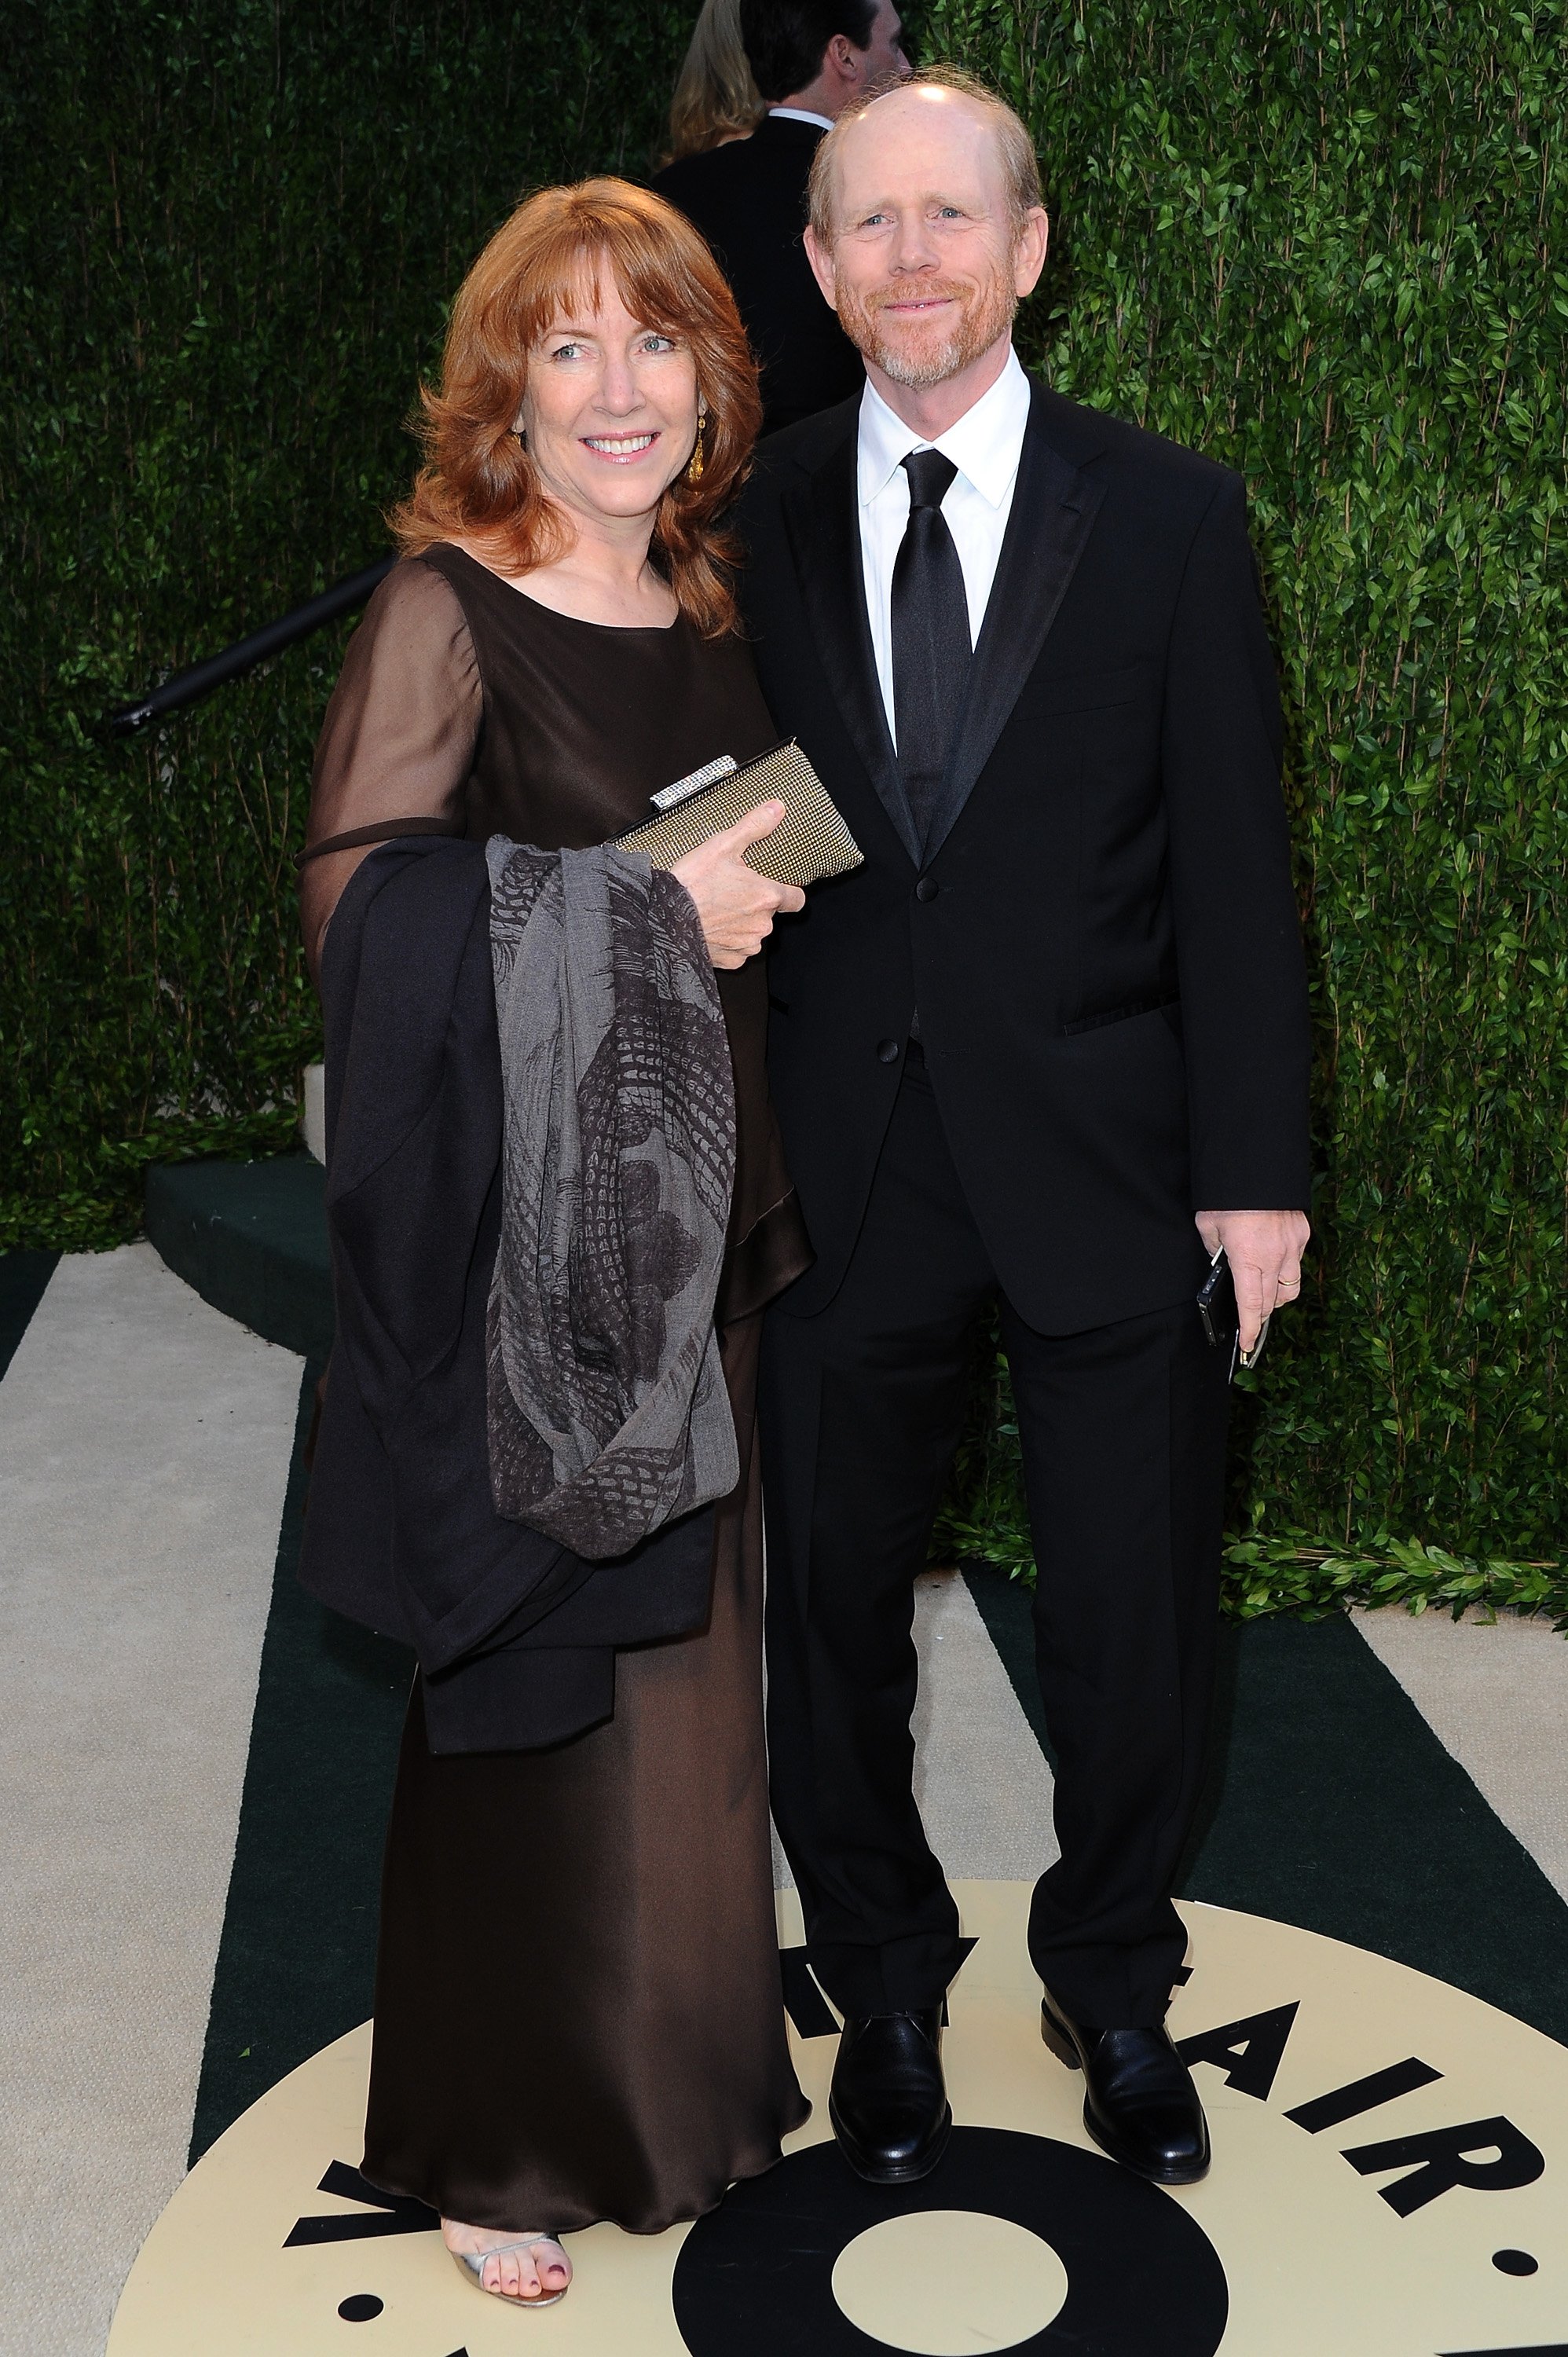 Ron Howard and Cheryl Howard arrive at the 2013 Vanity Fair Oscar Party hosted by Graydon Carter at Sunset Tower on February 24, 2013, in West Hollywood, California. | Source: Getty Images